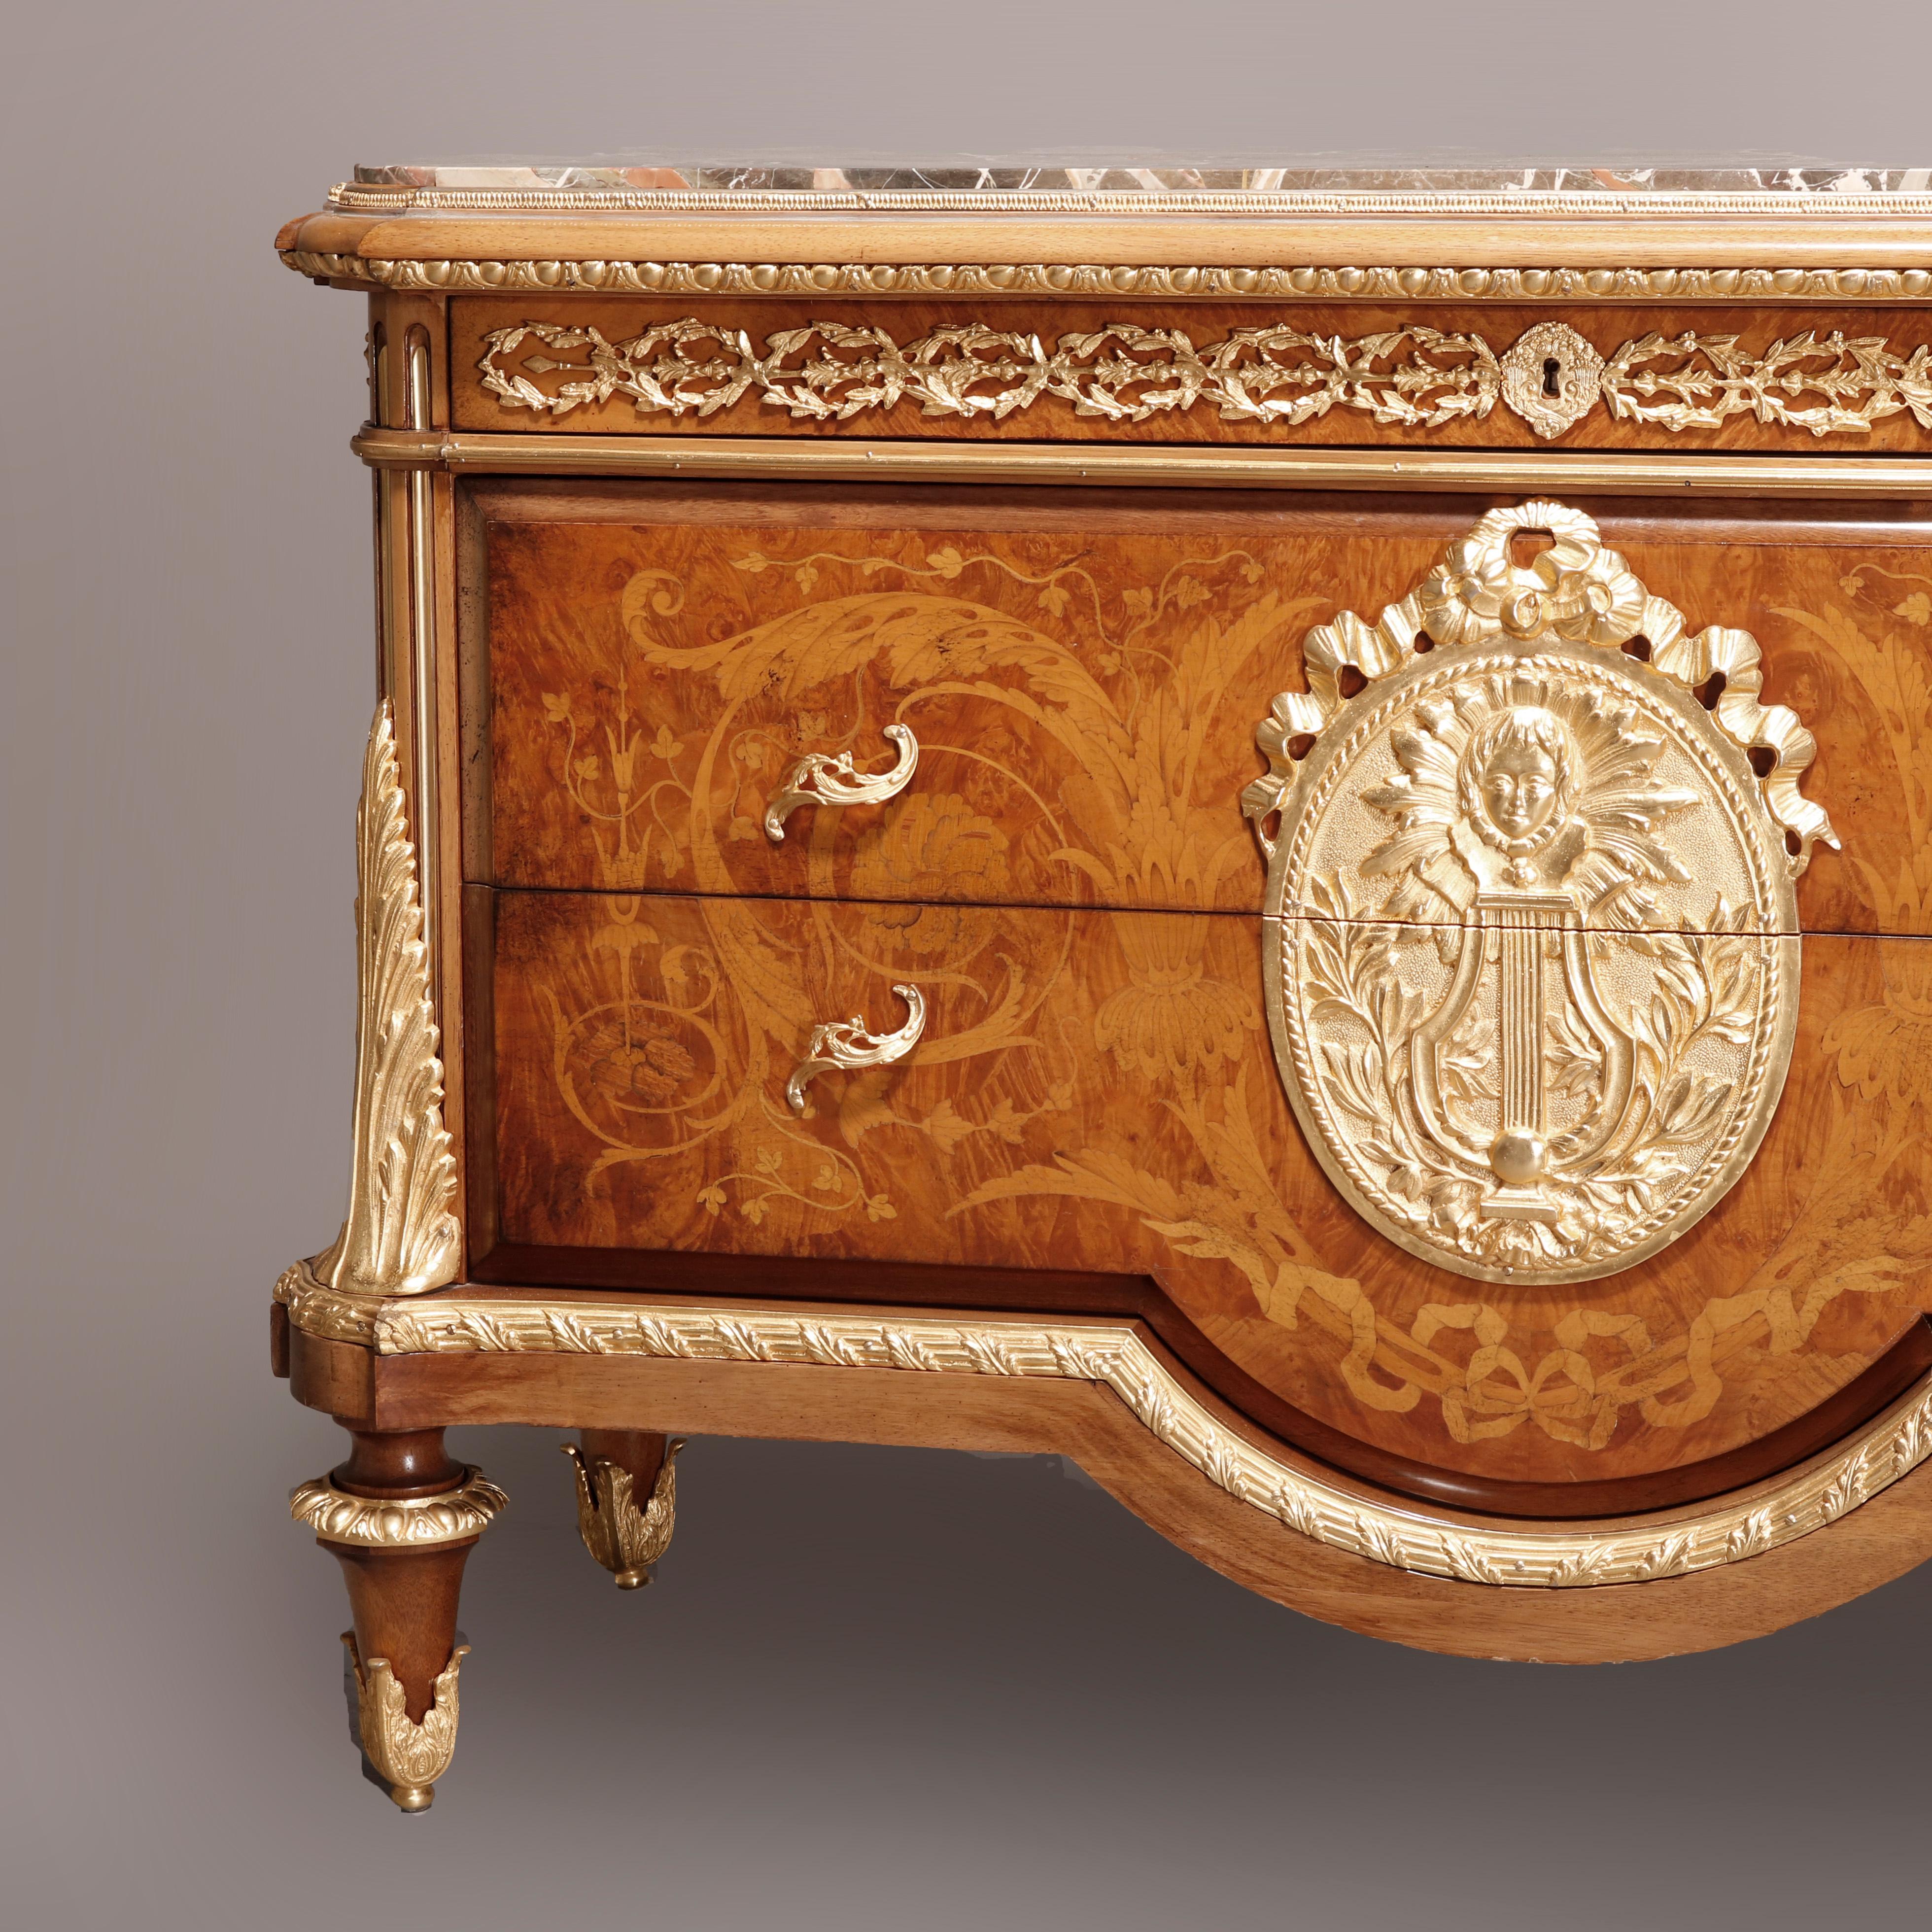 Louis XIV Antique French Empire Inlaid Satinwood, Marble, & Bronze Commode, 20th C